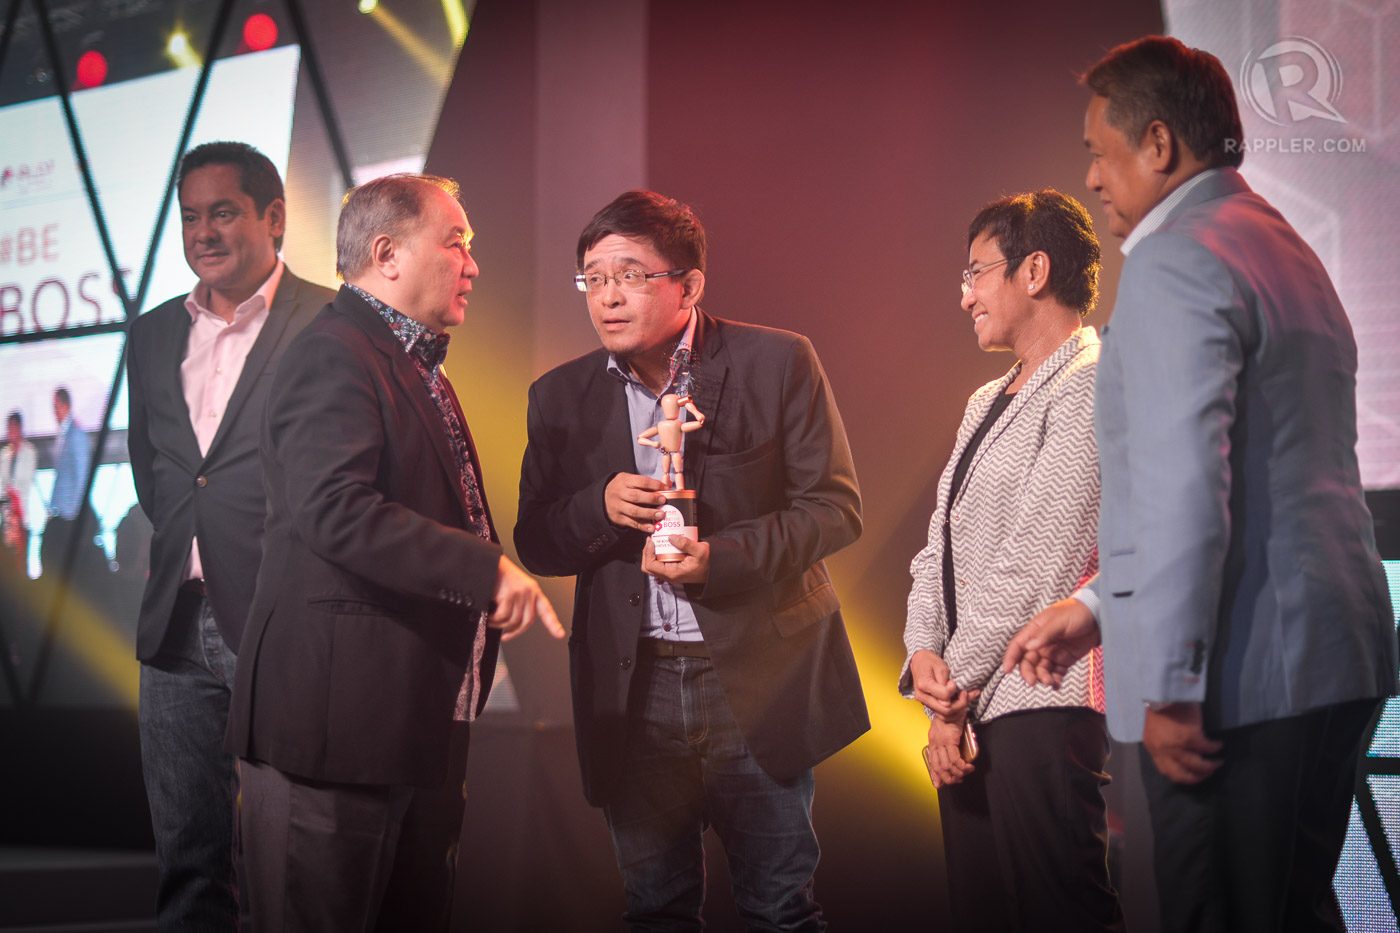 BOSS FOR INNOVATIVE SOLUTIONS. Matthew Cua (with trophy) and PLDT Smart Chairman Manual V. Pangilinan share a conversation while the #BeTheBoss judges look on 